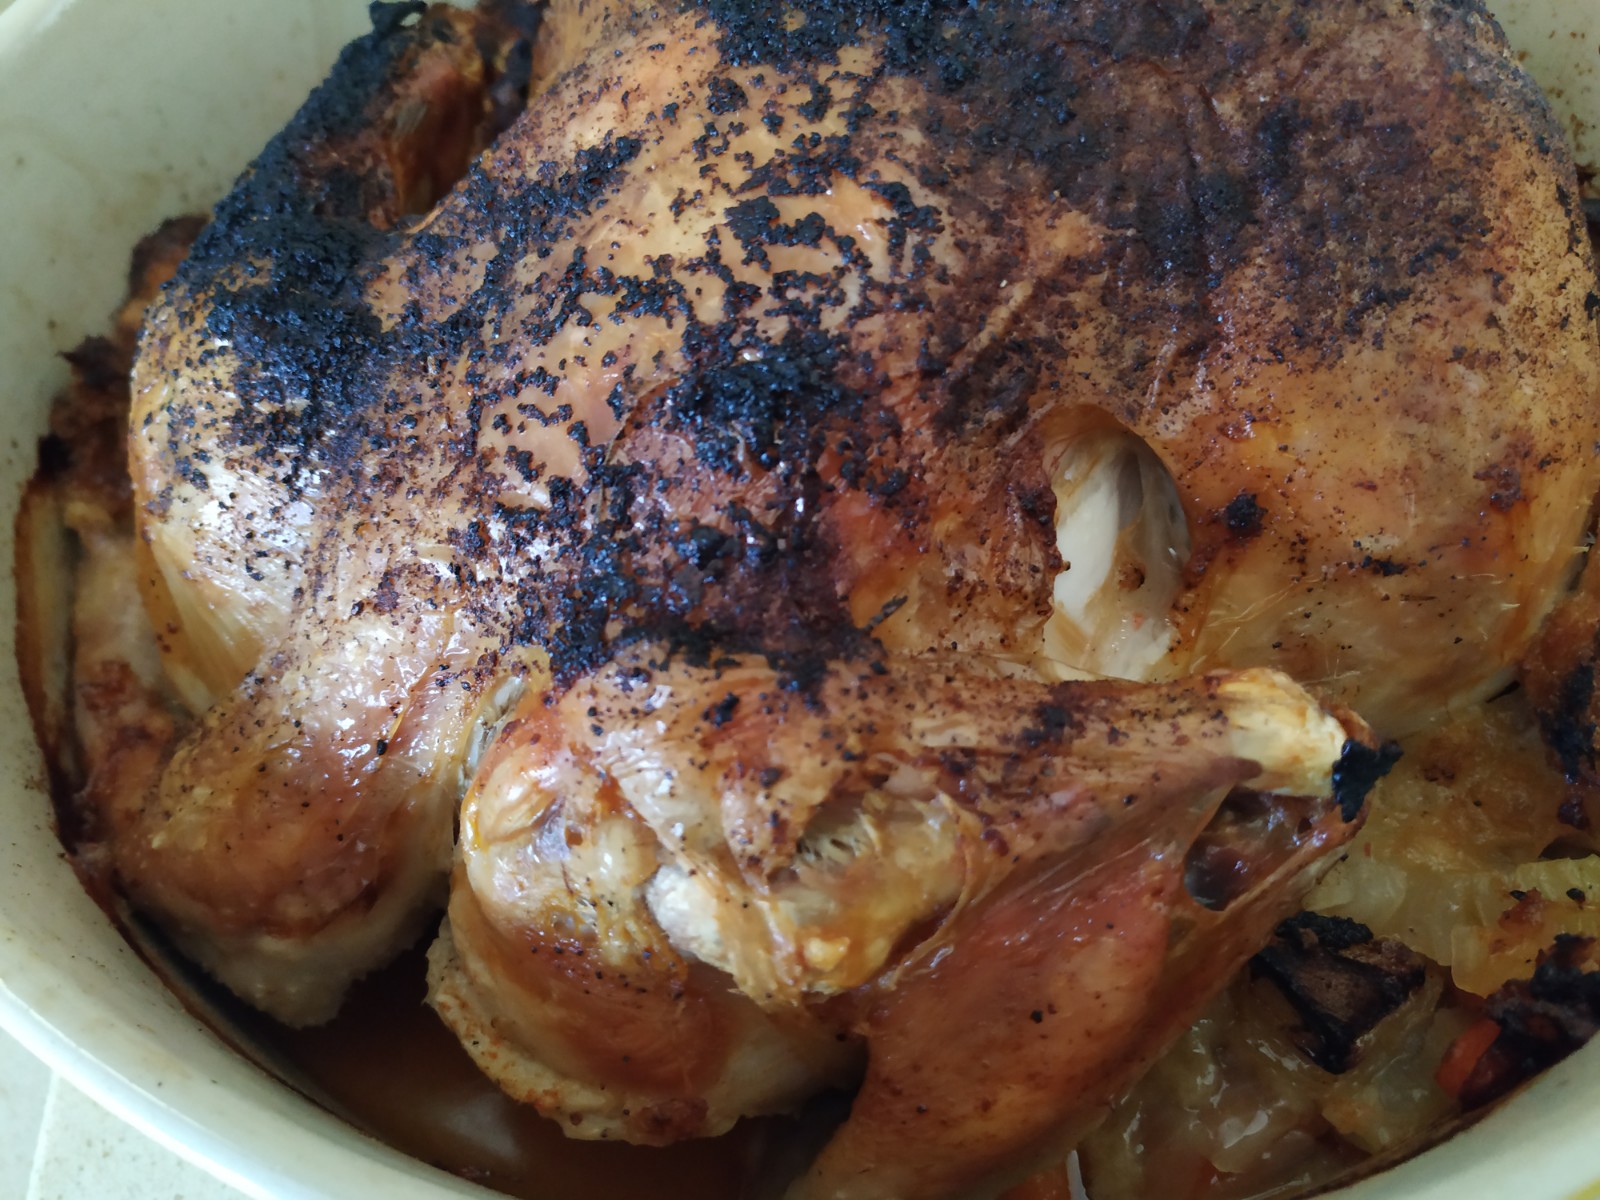 A Jewish Grandmother : Using Up Leftover Bread, Stuffed Chicken